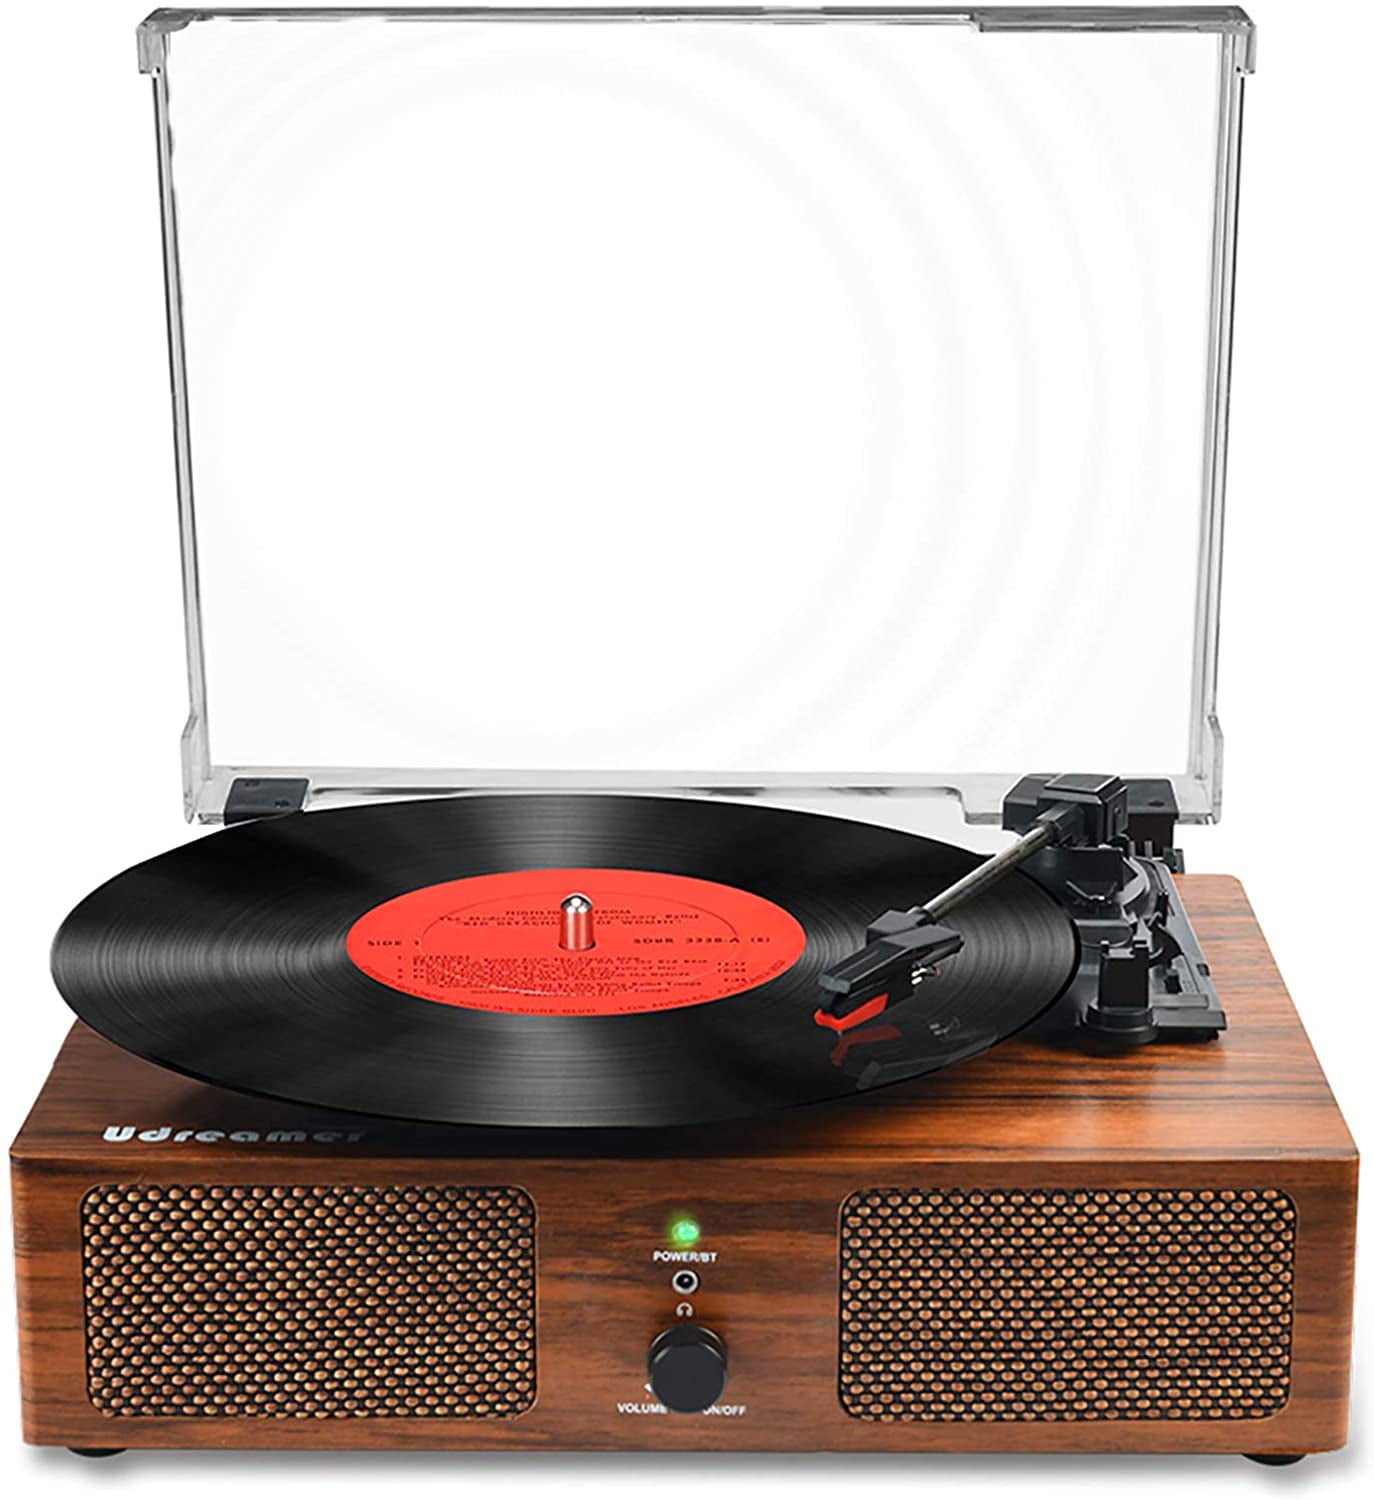 Vinyl Record Player Wireless Turntable with Built-in Ireland